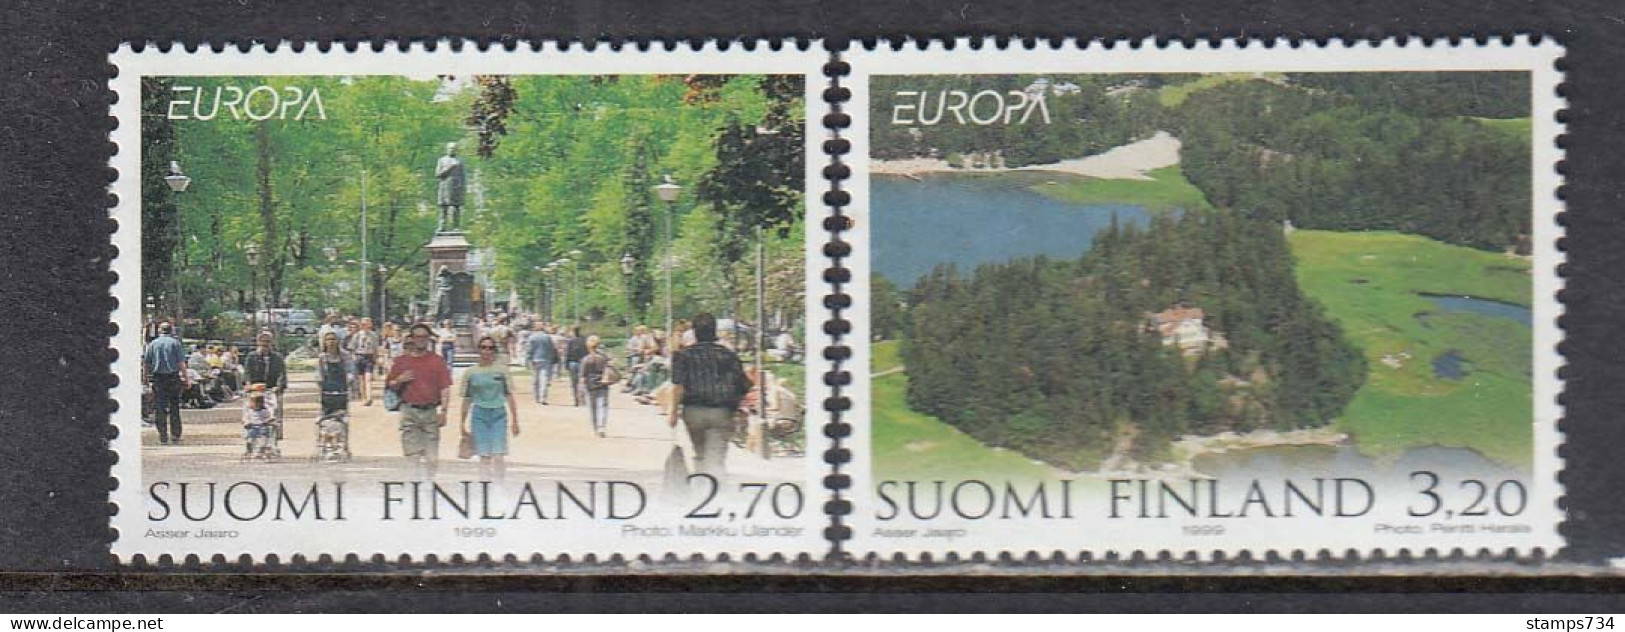 Finland 1999 - EUROPA: Nature And National Parks, Mi-Nr. 1474/75, MNH** - Nuevos